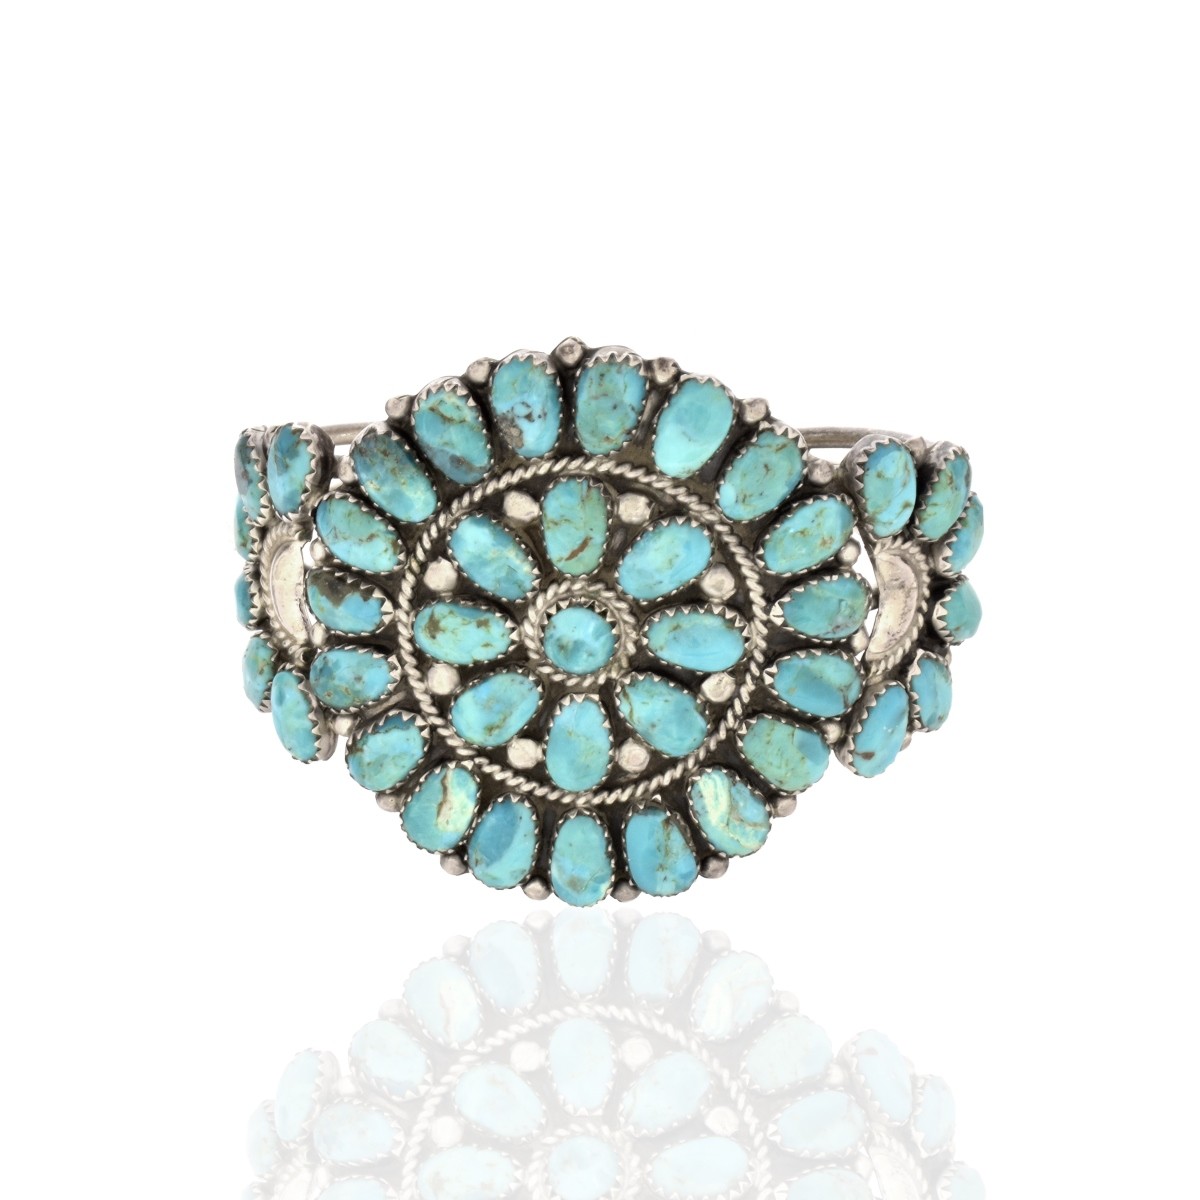 JWMS Turquoise and Sterling Bracelet